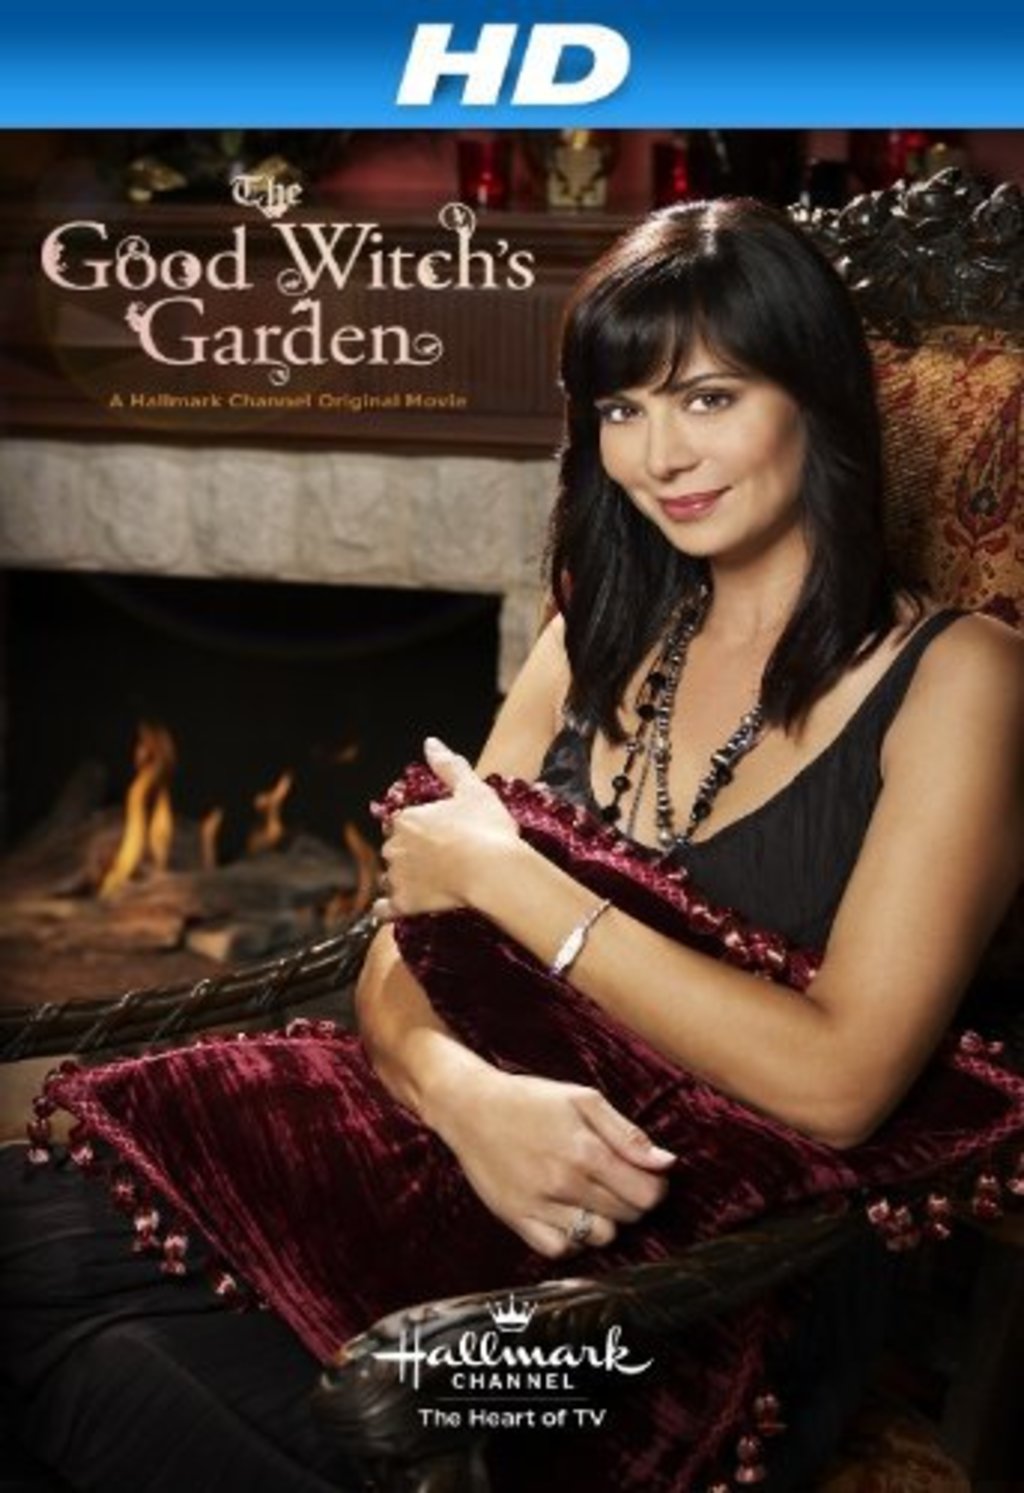 Watch The Good Witch's Garden on Netflix Today ...